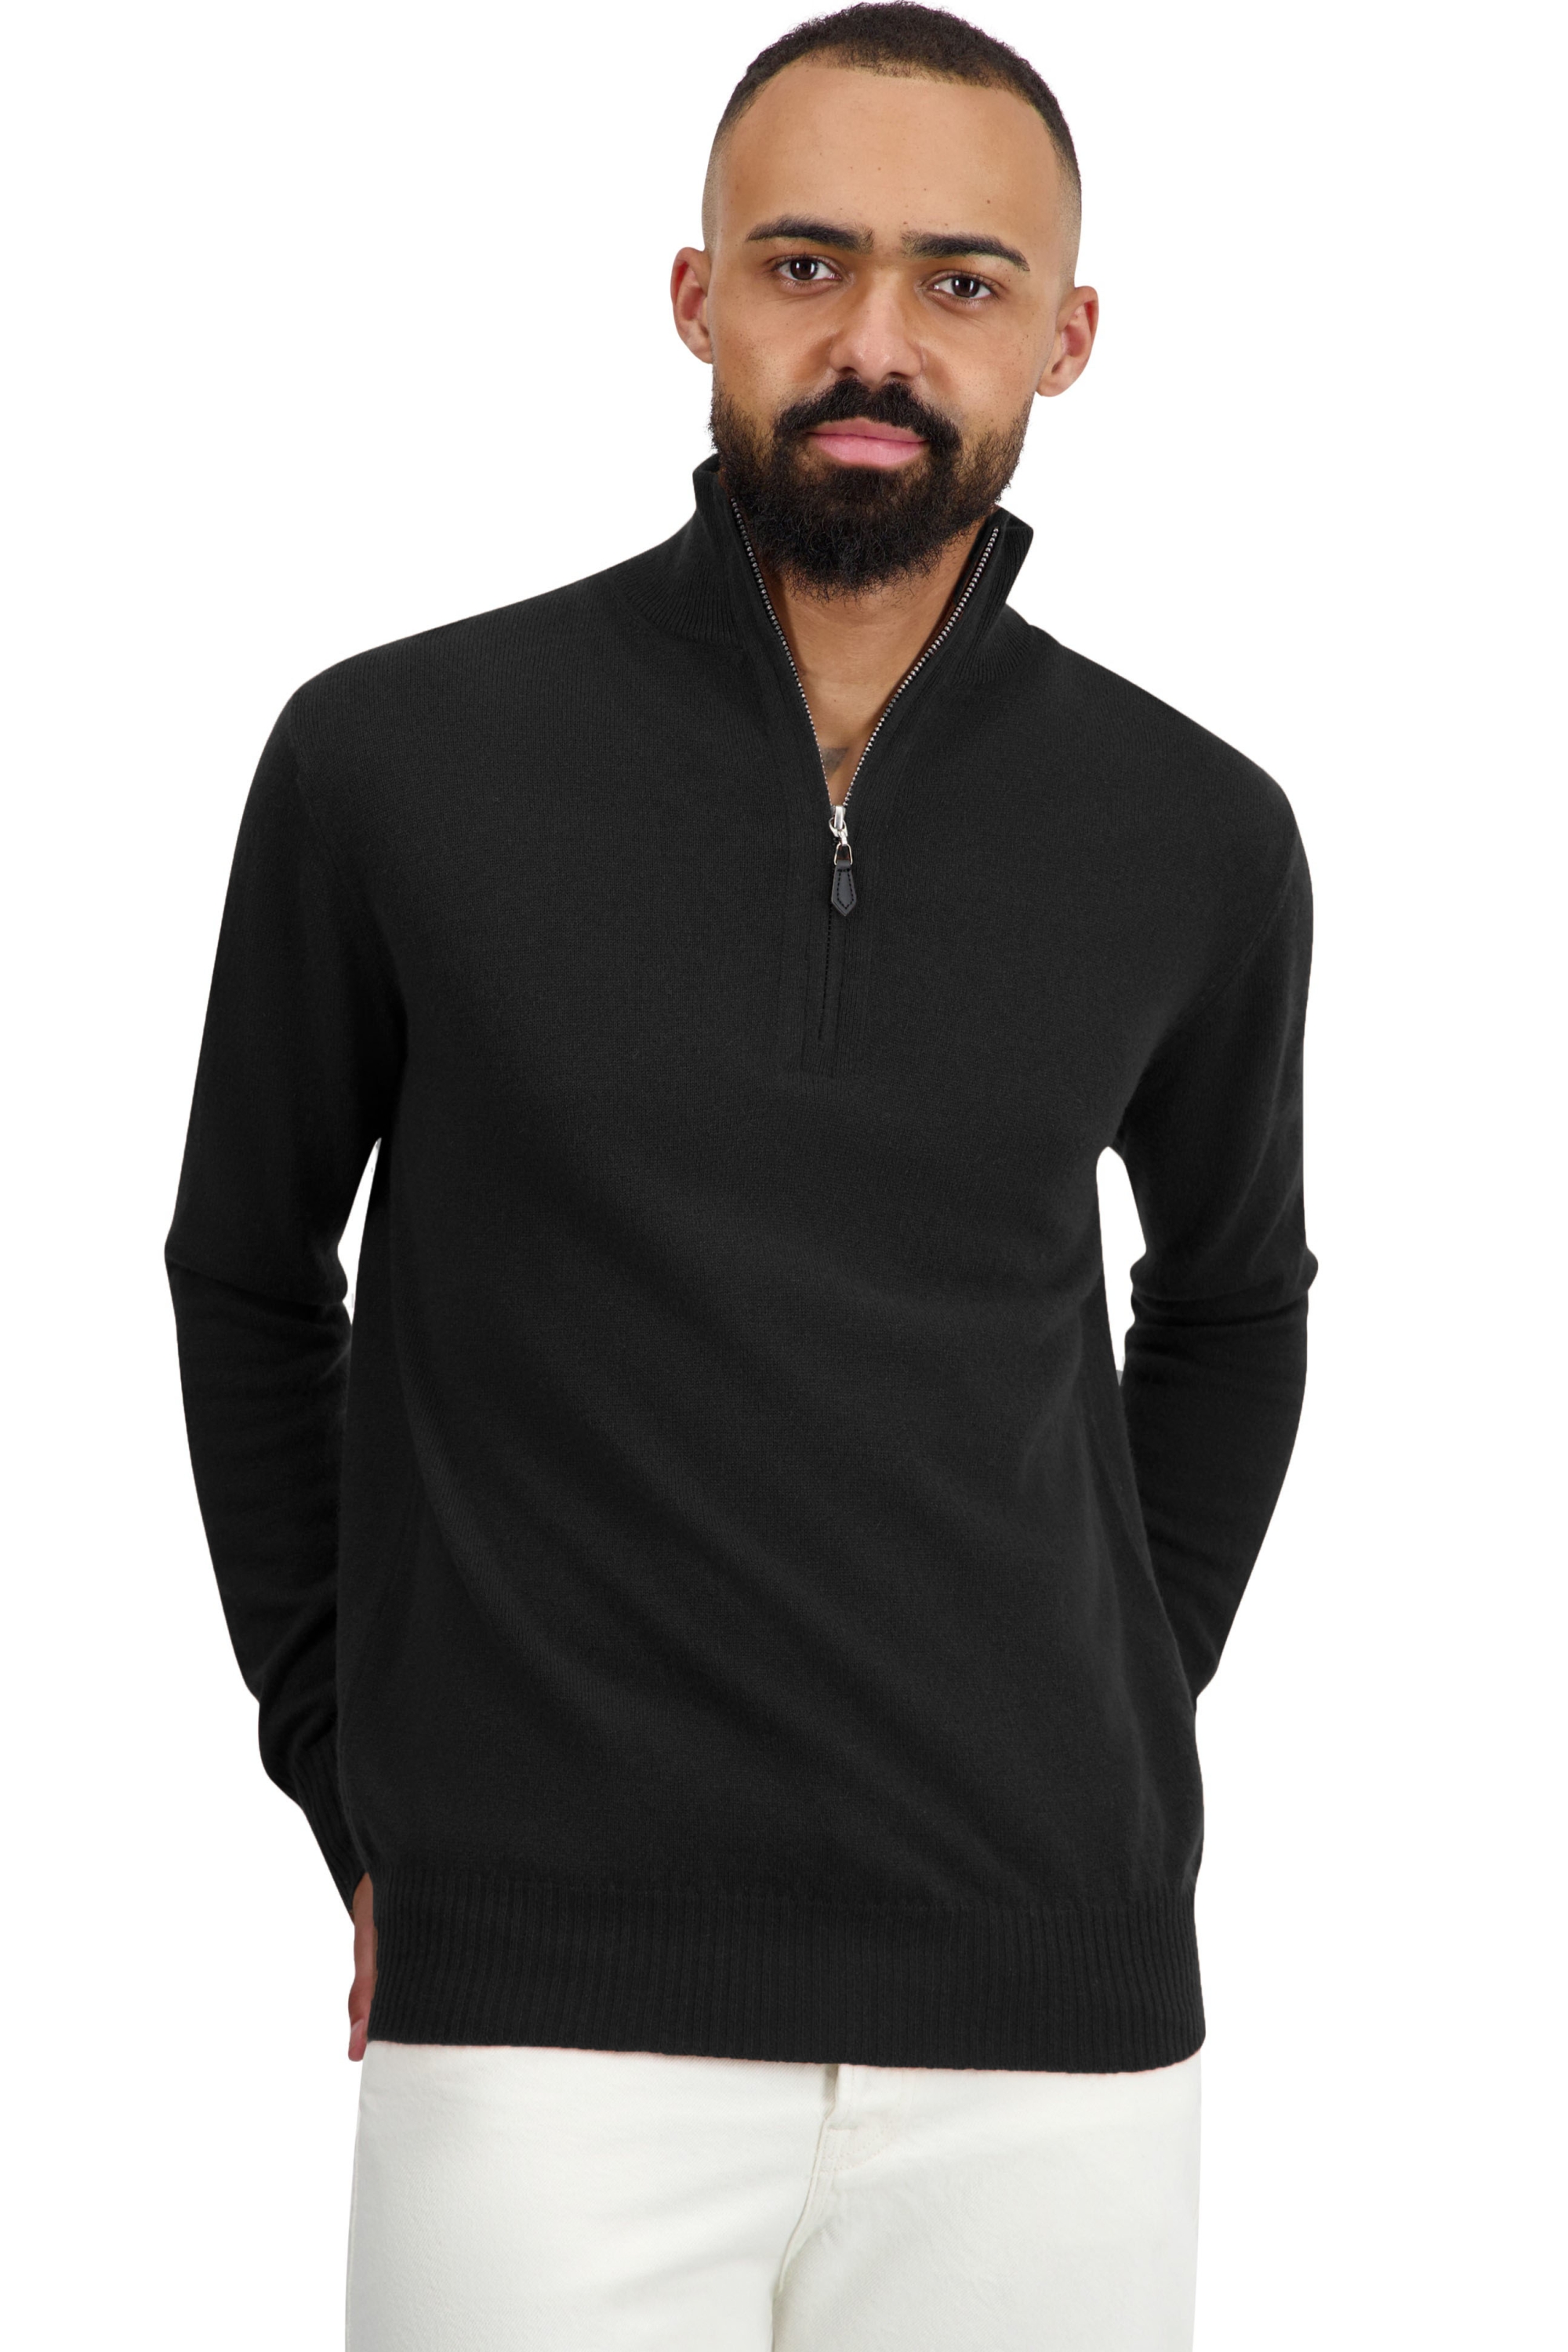 Cashmere men basic sweaters at low prices toulon first black 3xl